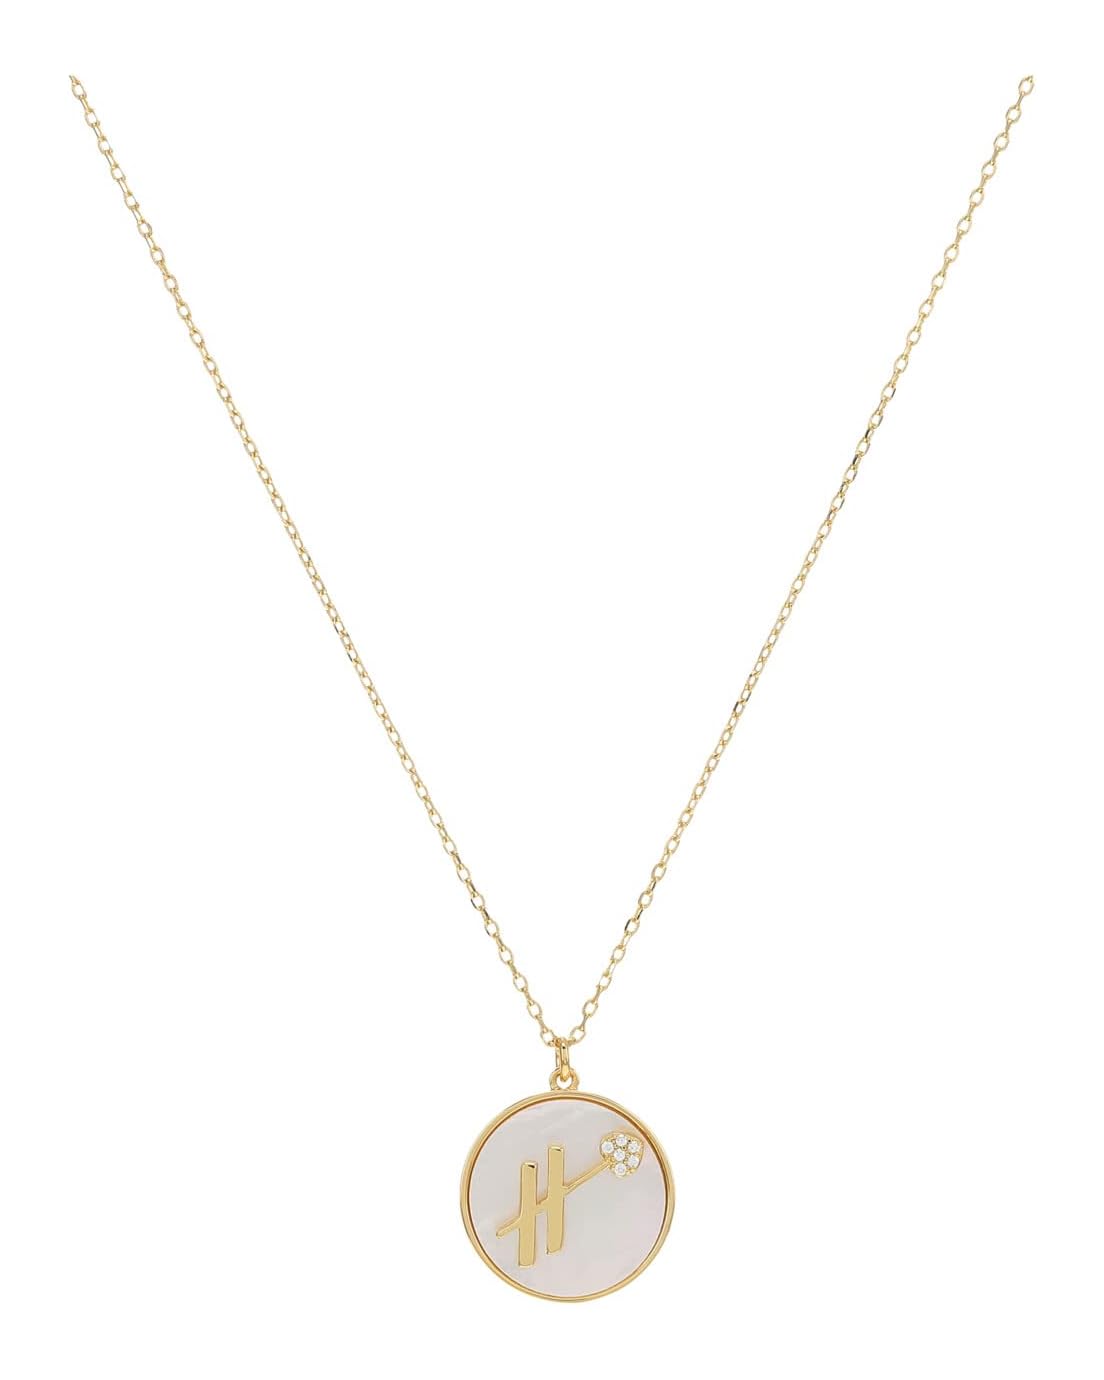 Kate Spade New York In The Stars Mother-of-Pearl Sagittarius Pendant Necklace